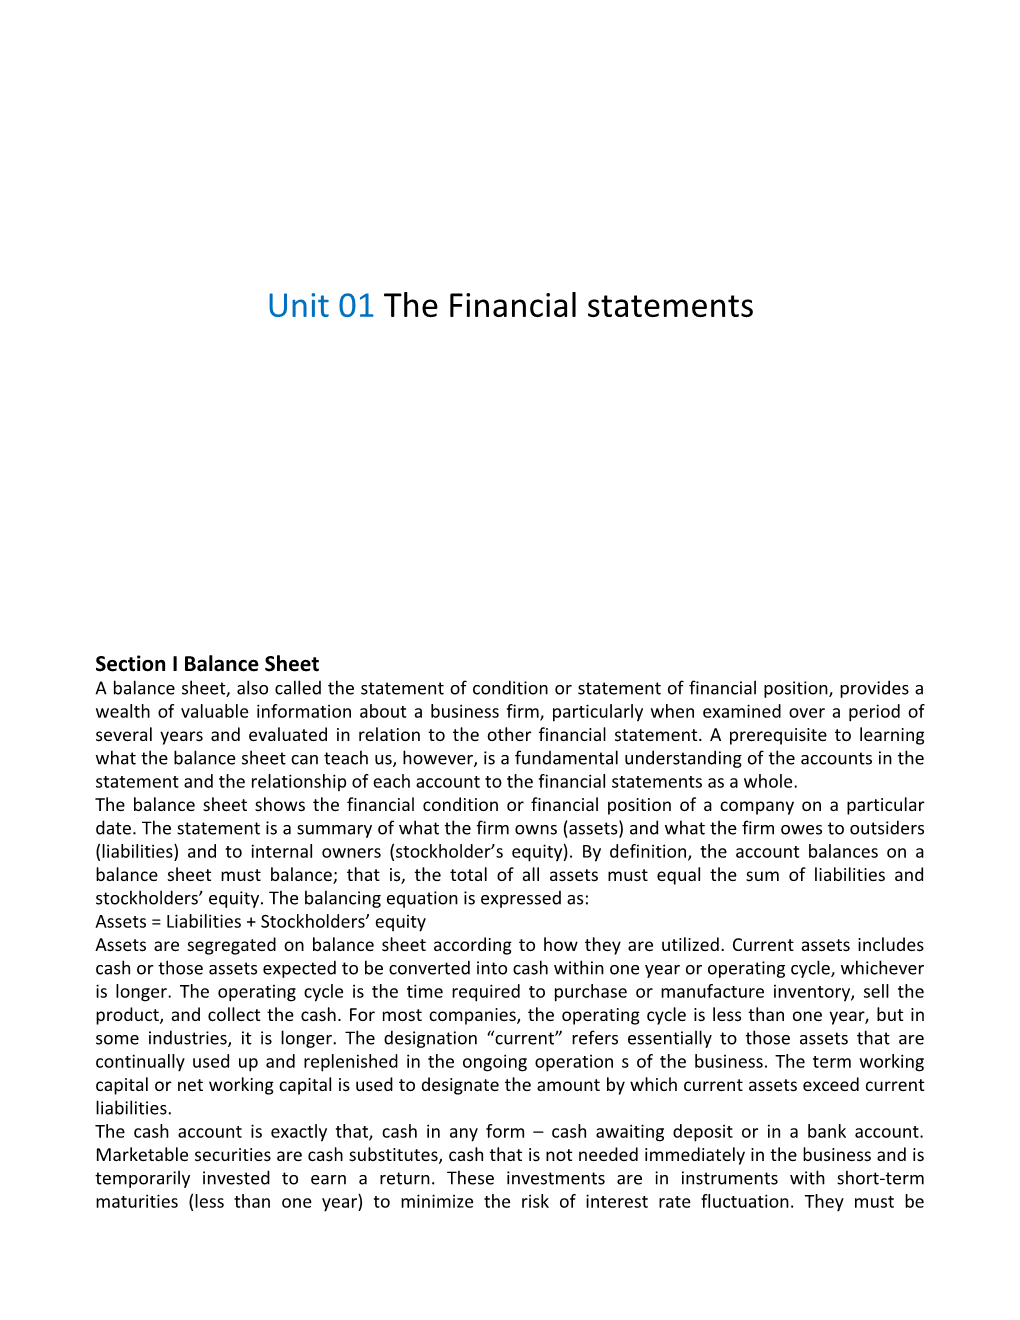 Unit 01 the Financial Statements